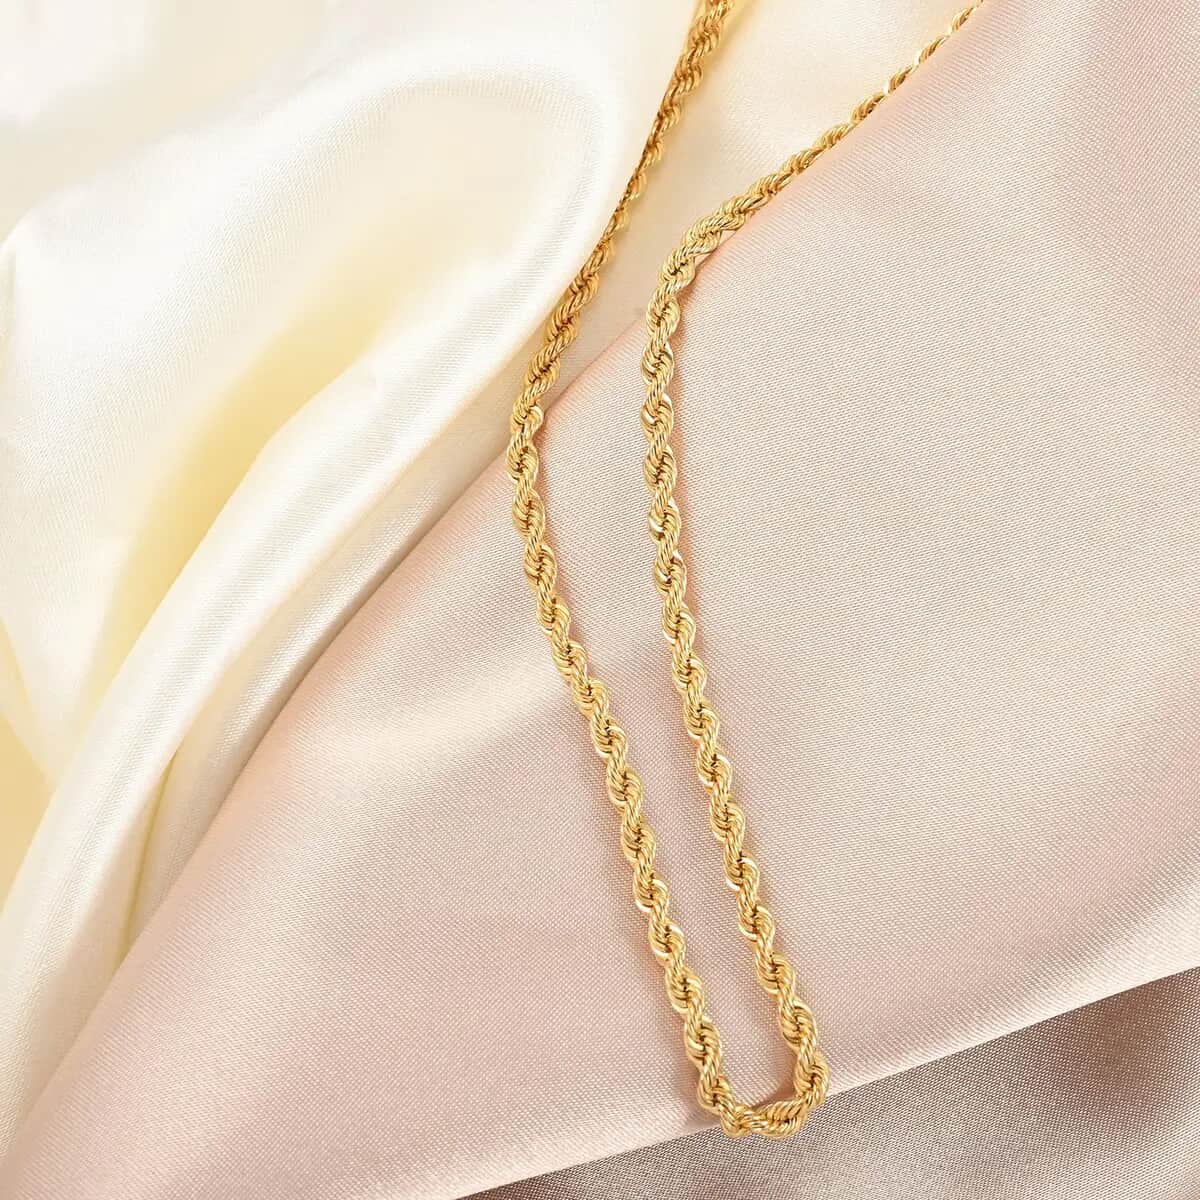 10K Yellow Gold Rope Chain Necklace, 20 Inch Necklace, Gold Jewelry 1.5mm 1.4 Grams image number 3